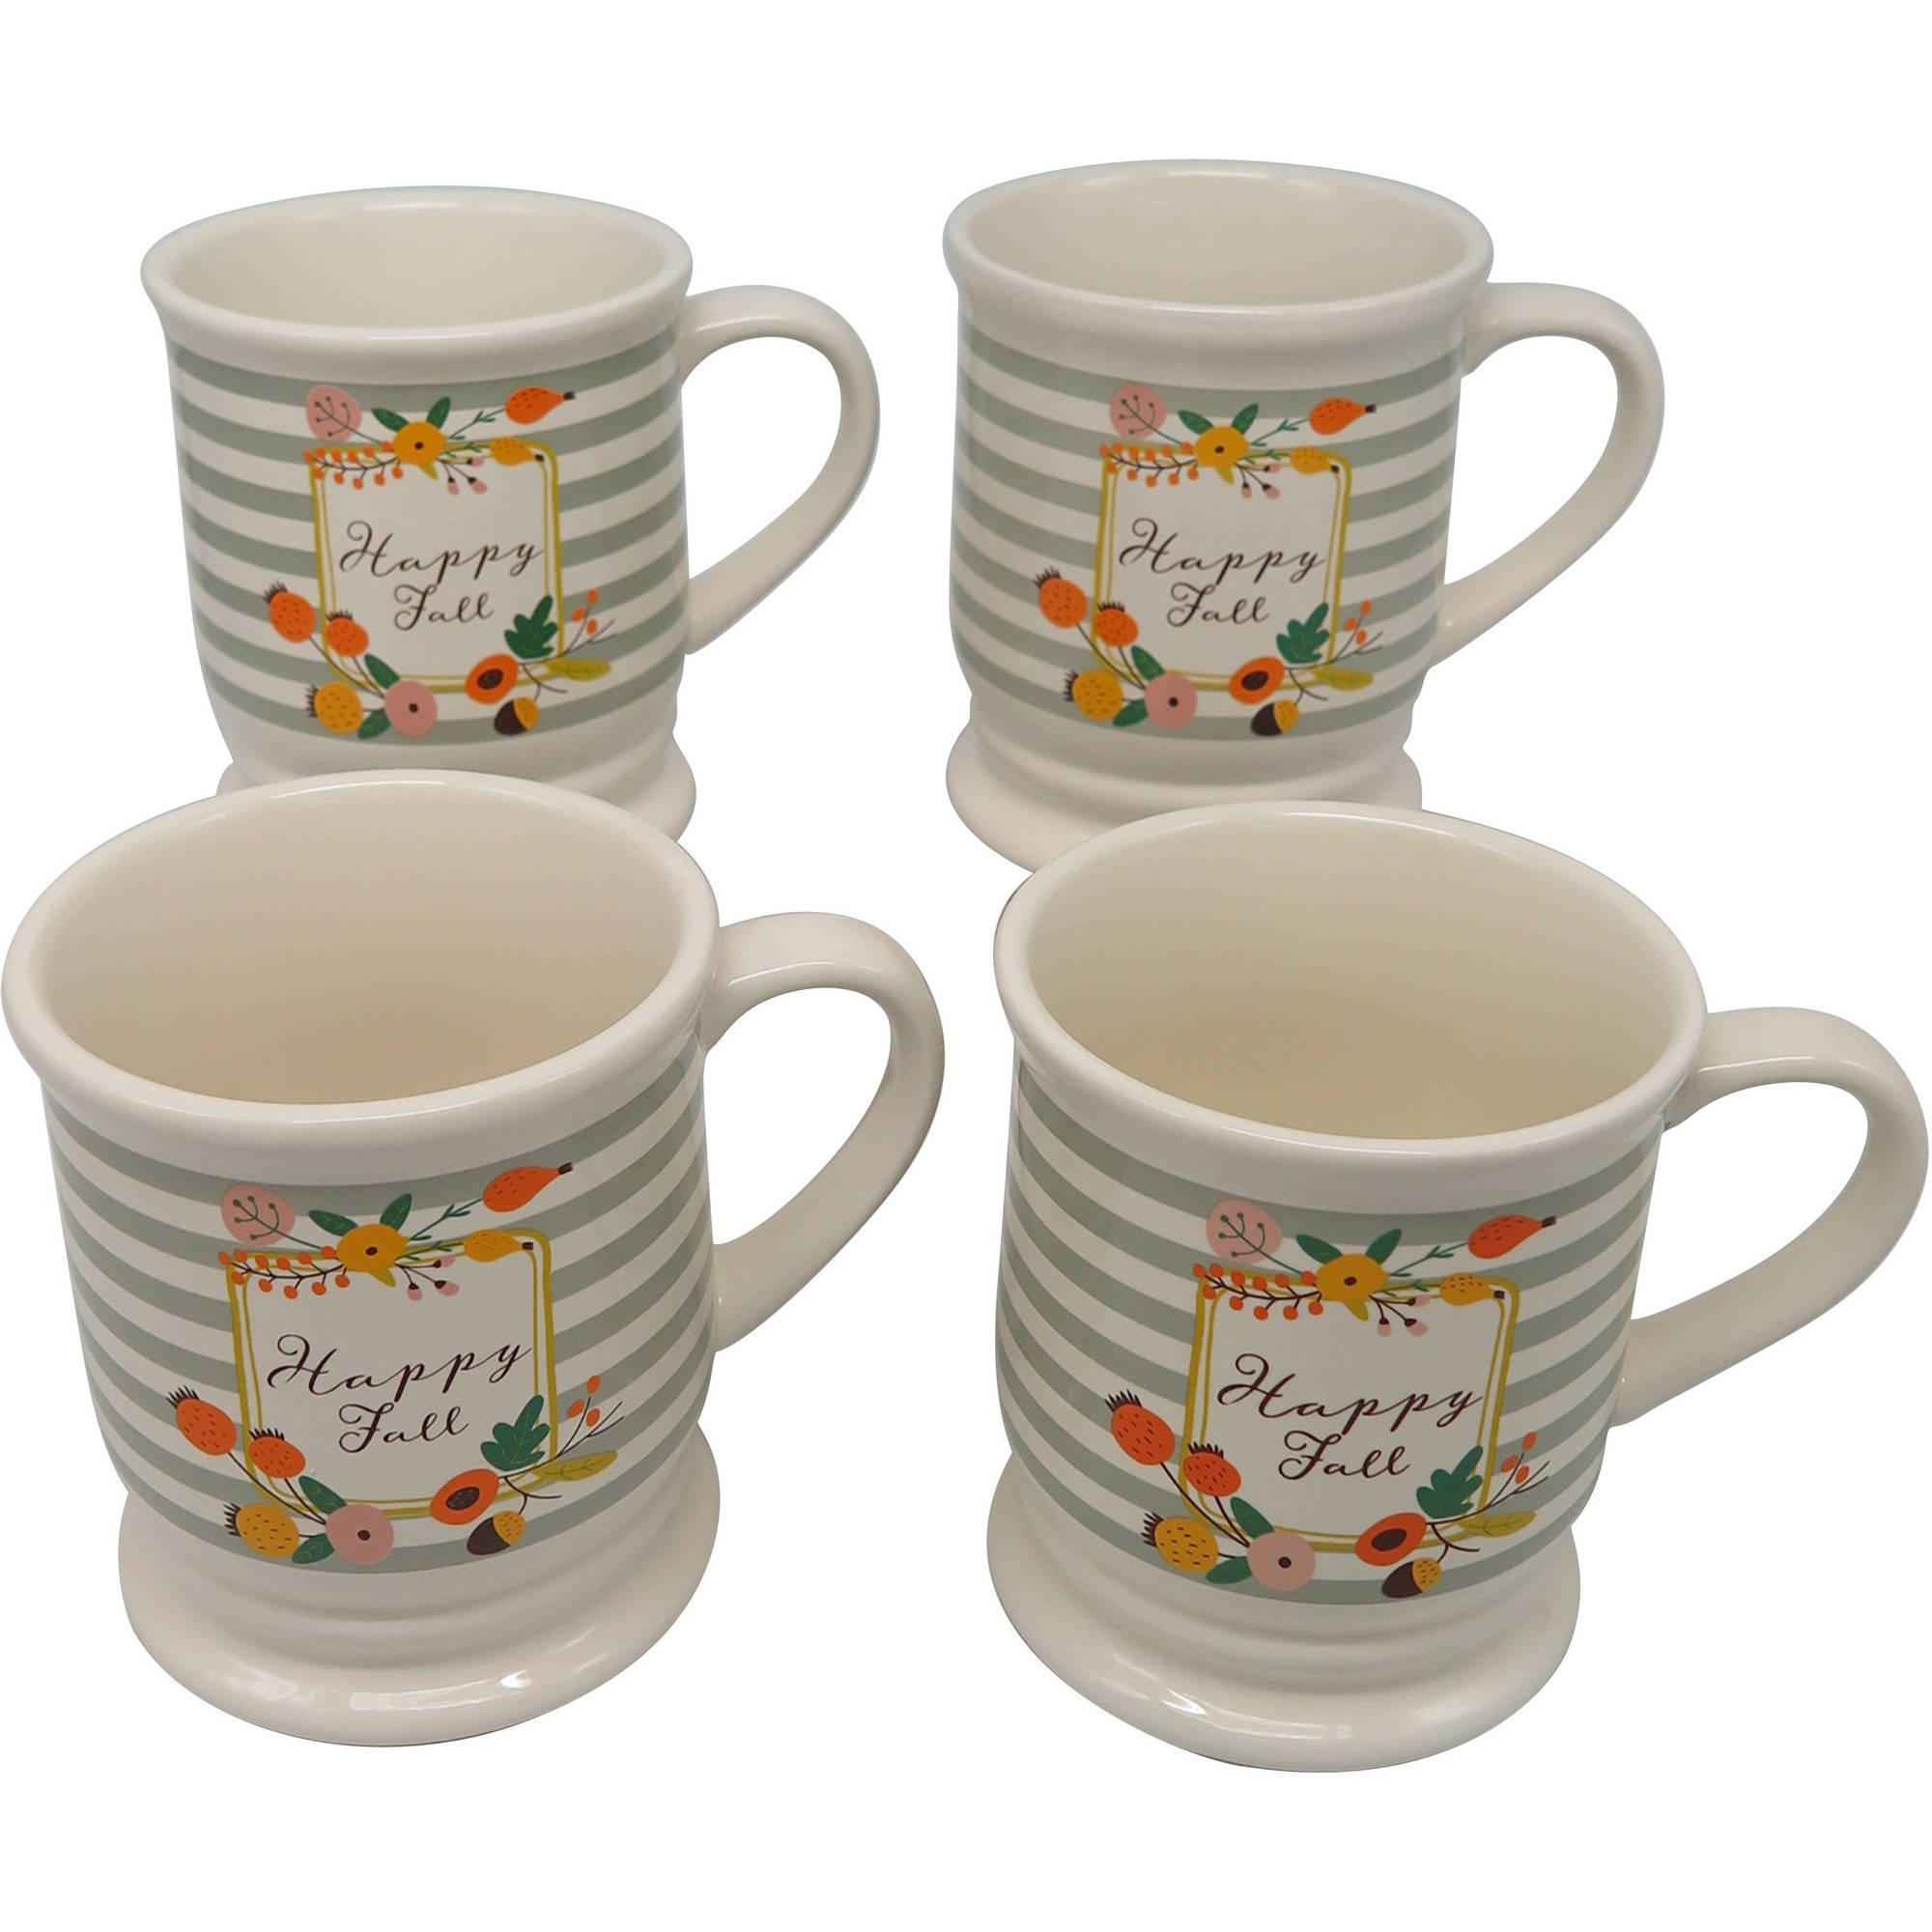 Mainstays 16-Piece Happy Harvest Fall Floral Dinnerware Set - image 4 of 5